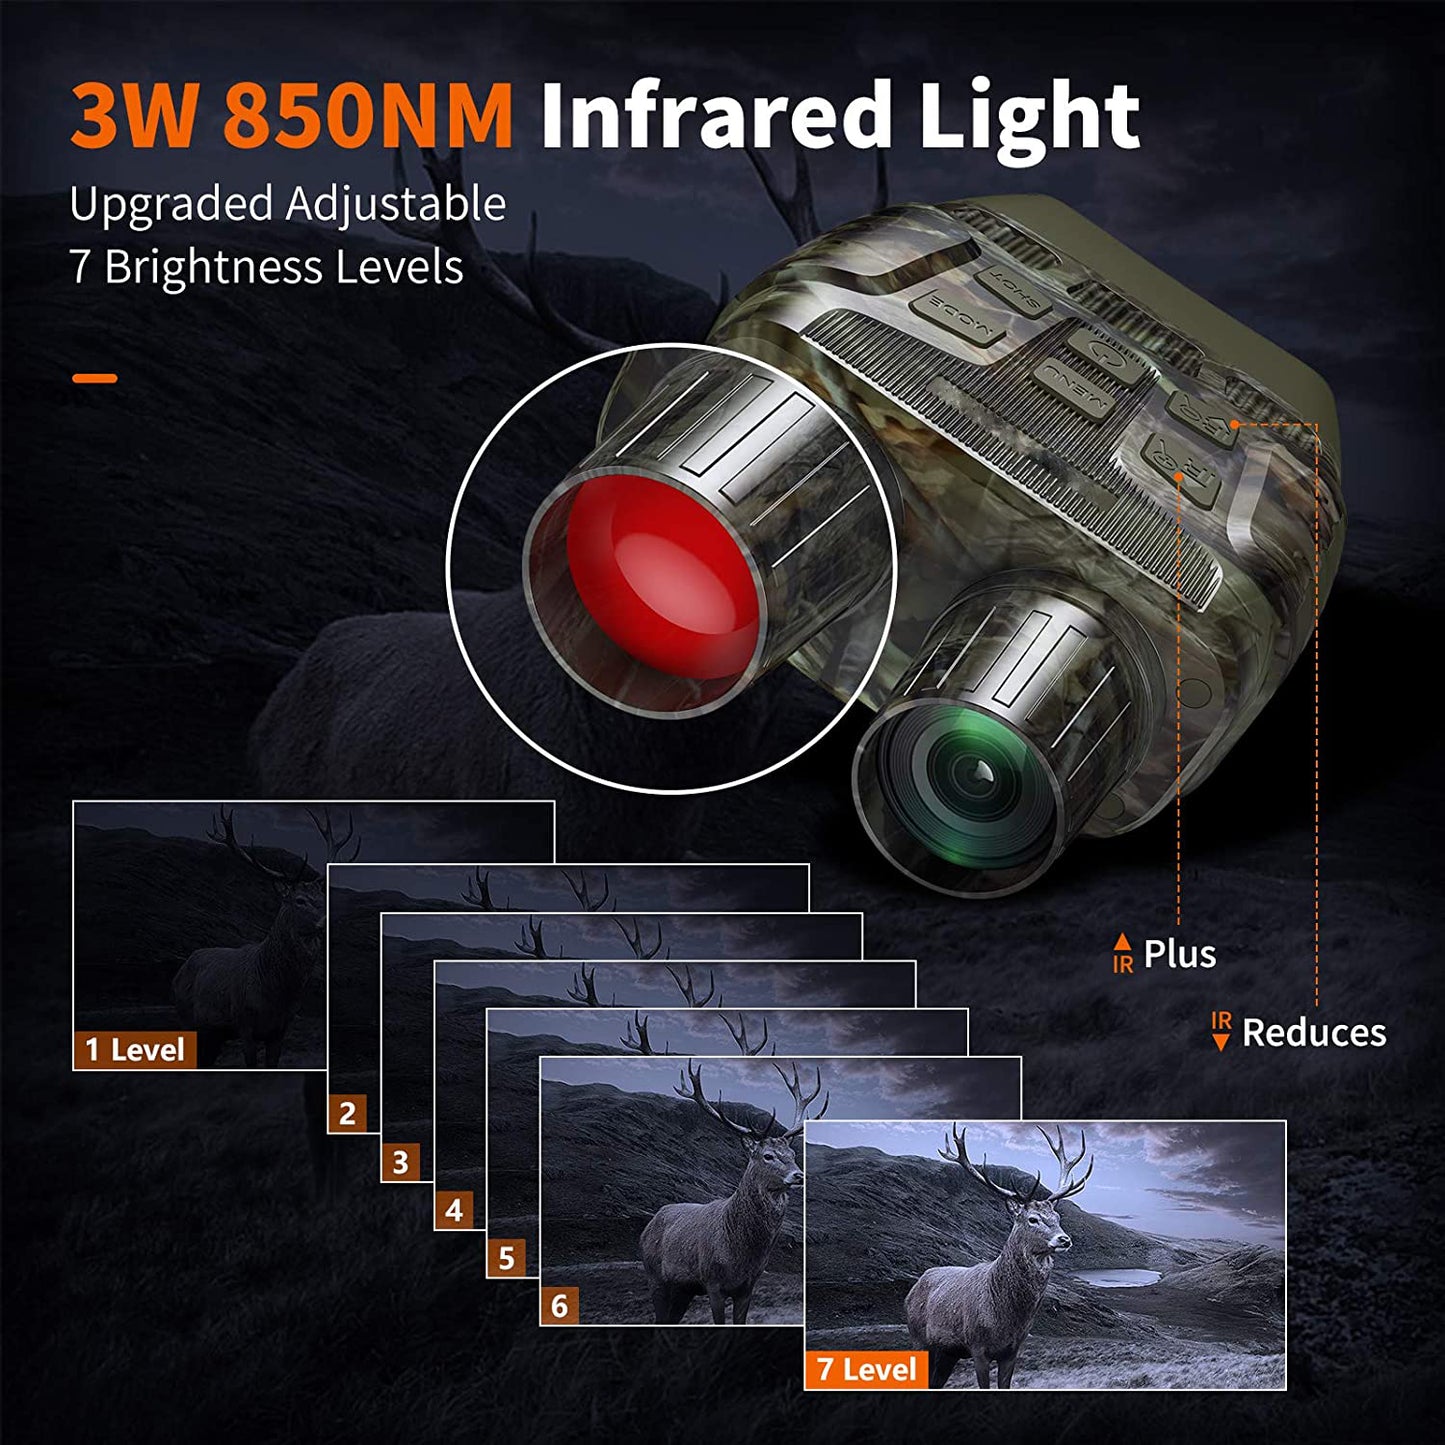 NV3180 Infrared Digital Night Vision Goggles with Image and Video Recording Function for Hunting